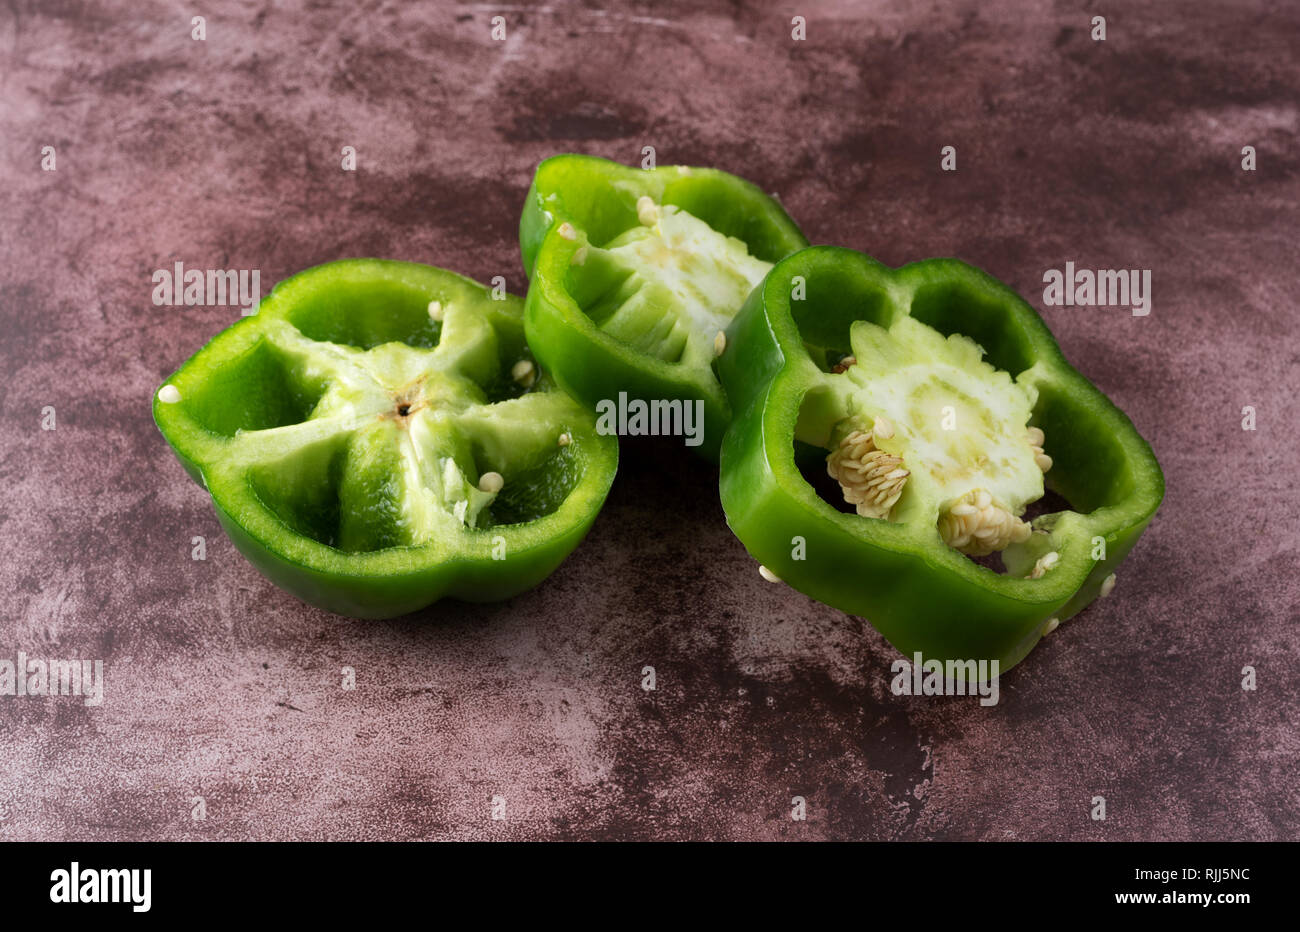 Side view of three slices of green bell pepper on a maroon counter top. Stock Photo